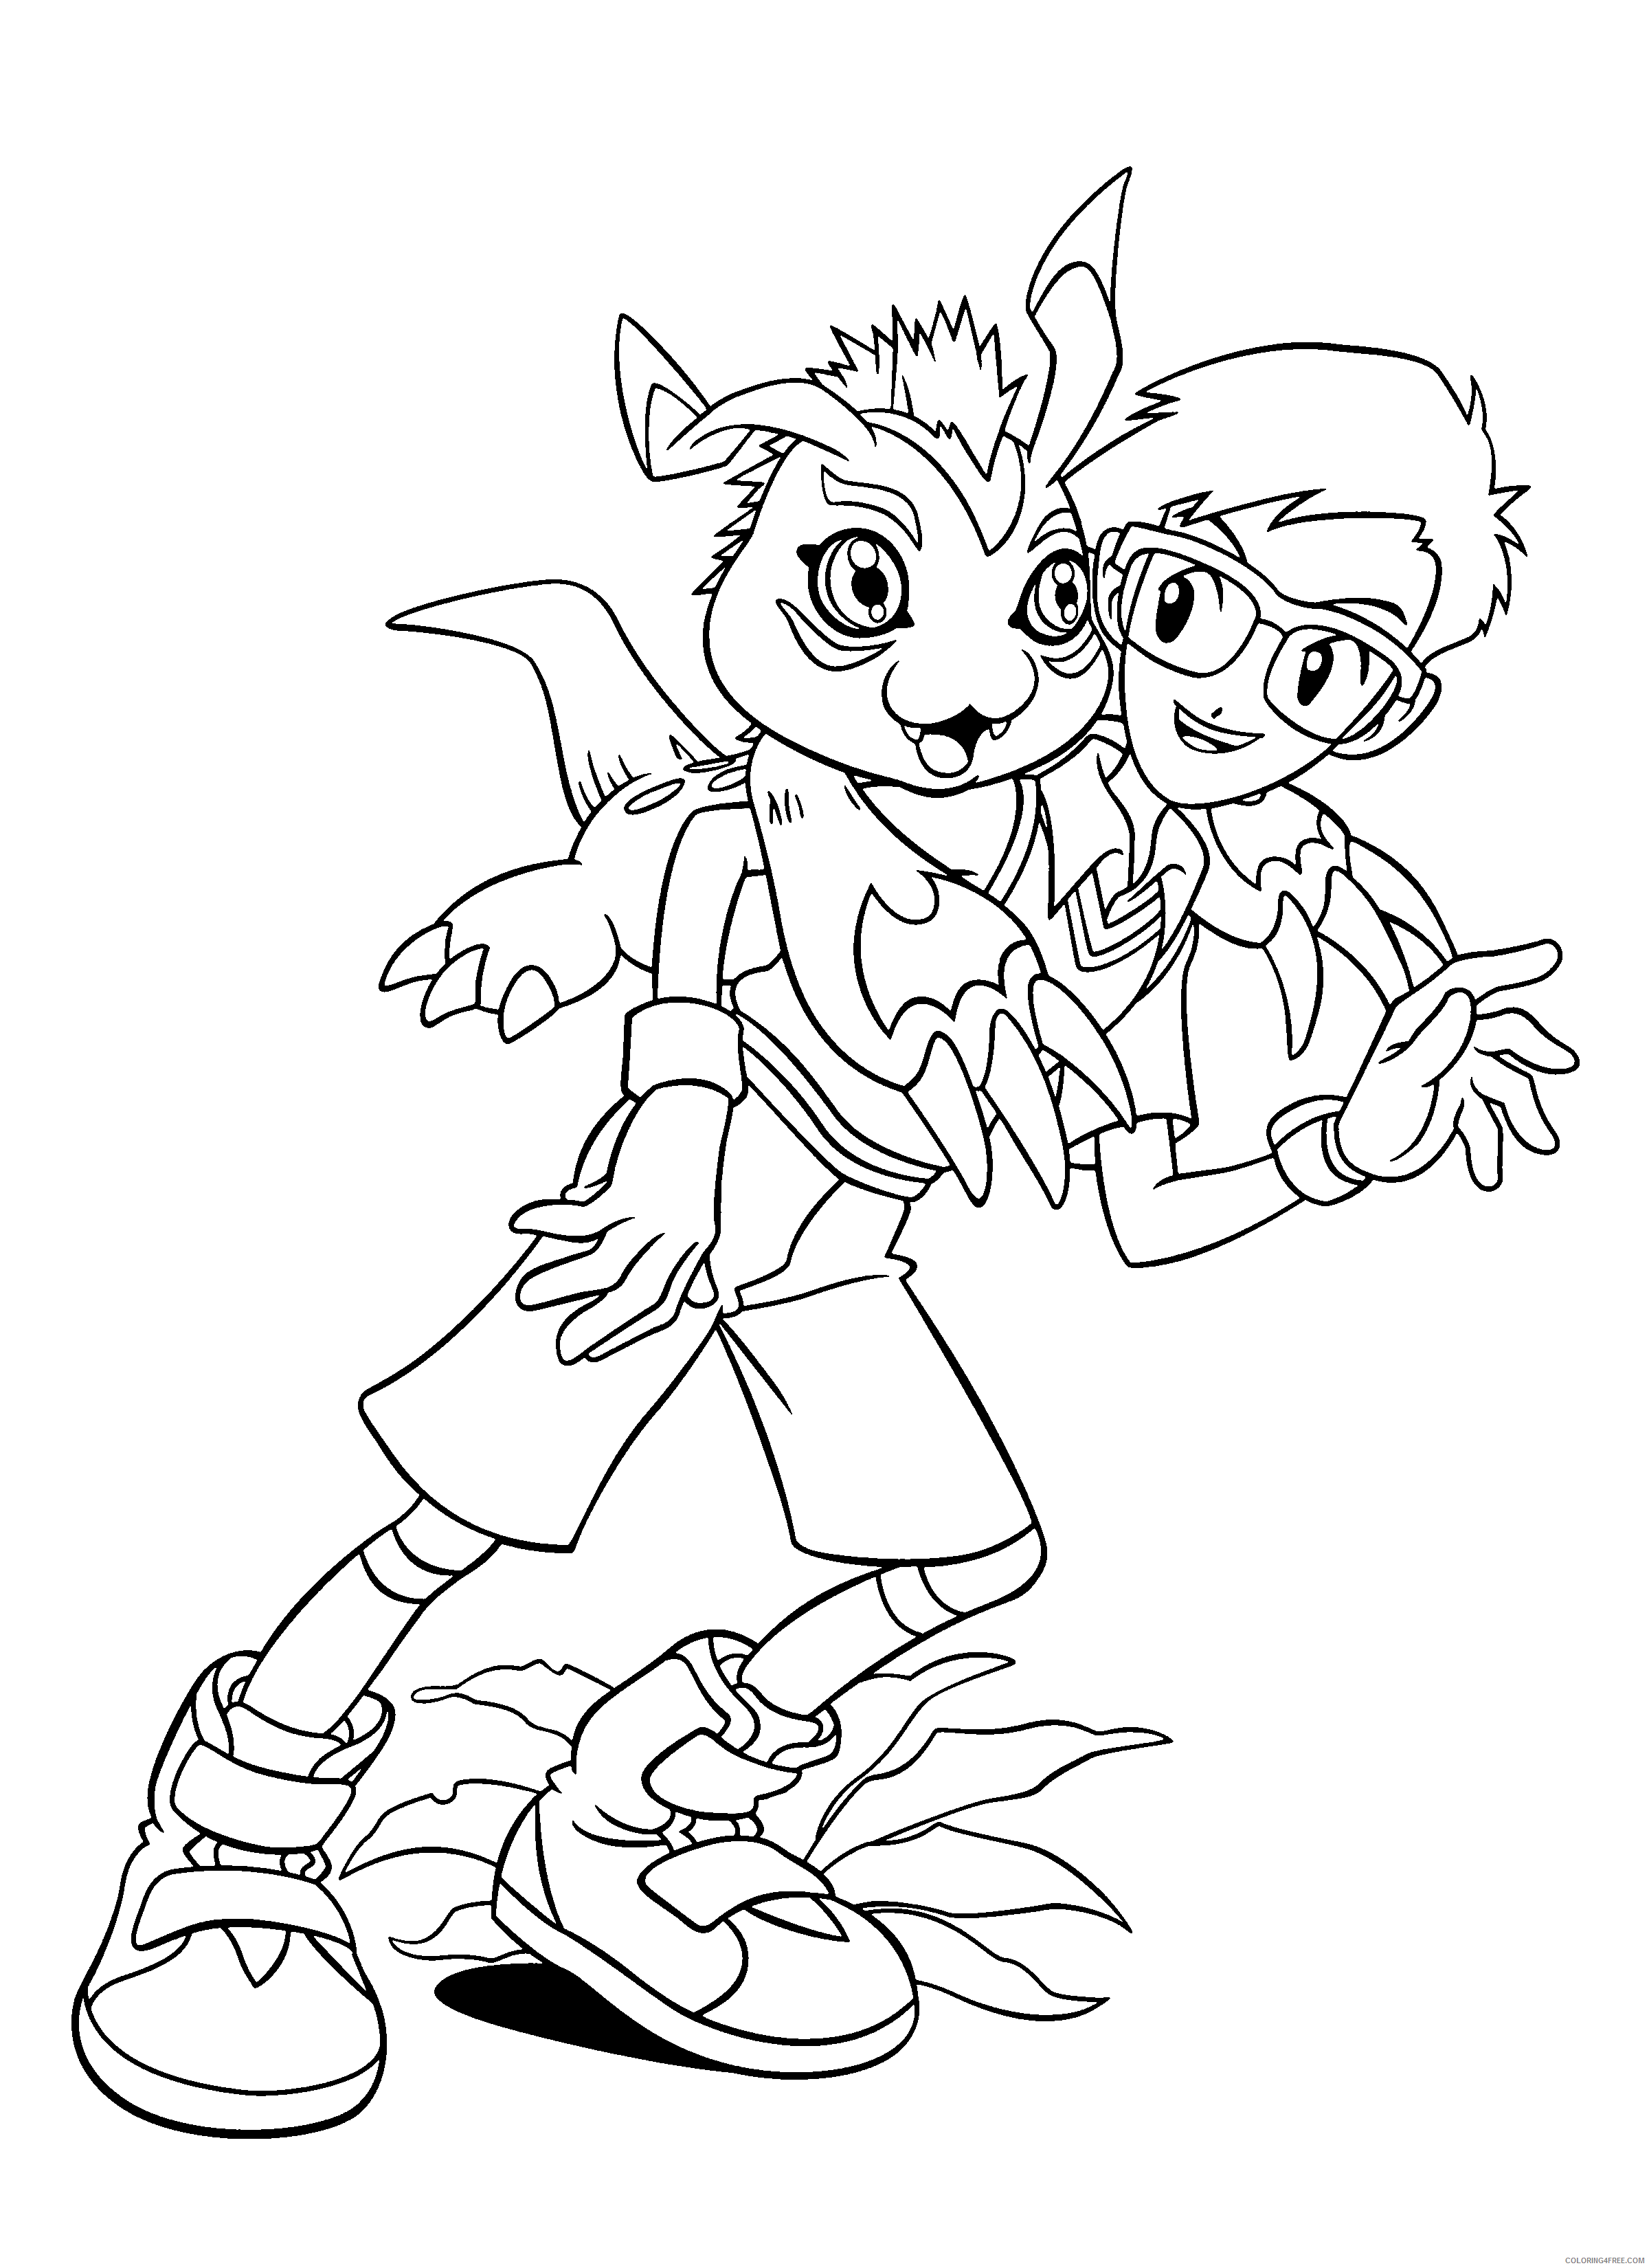 Digimon Printable Coloring Pages Anime digimon 268 2021 0348 Coloring4free